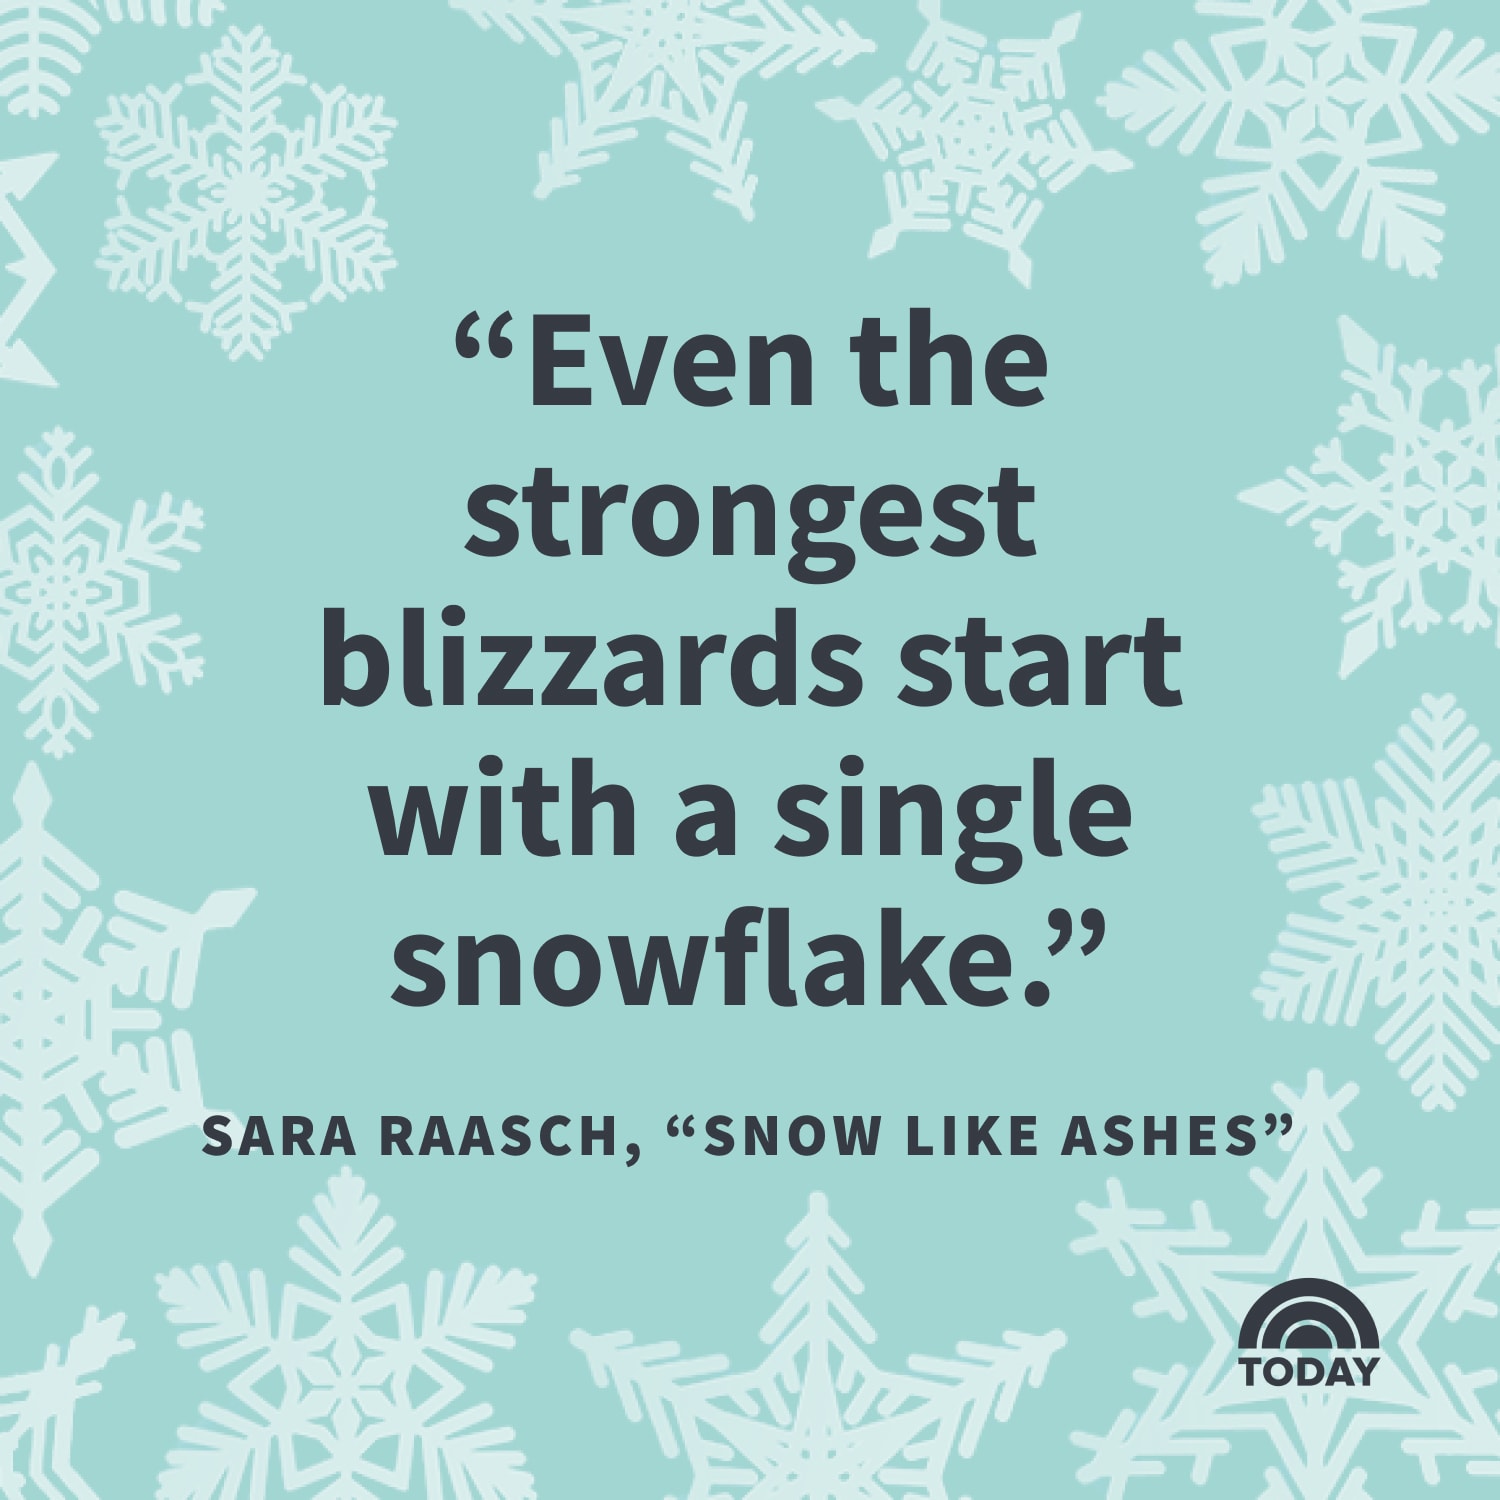 75 Best Snow Quotes — Snowy Winter Quotes & Sayings - Parade